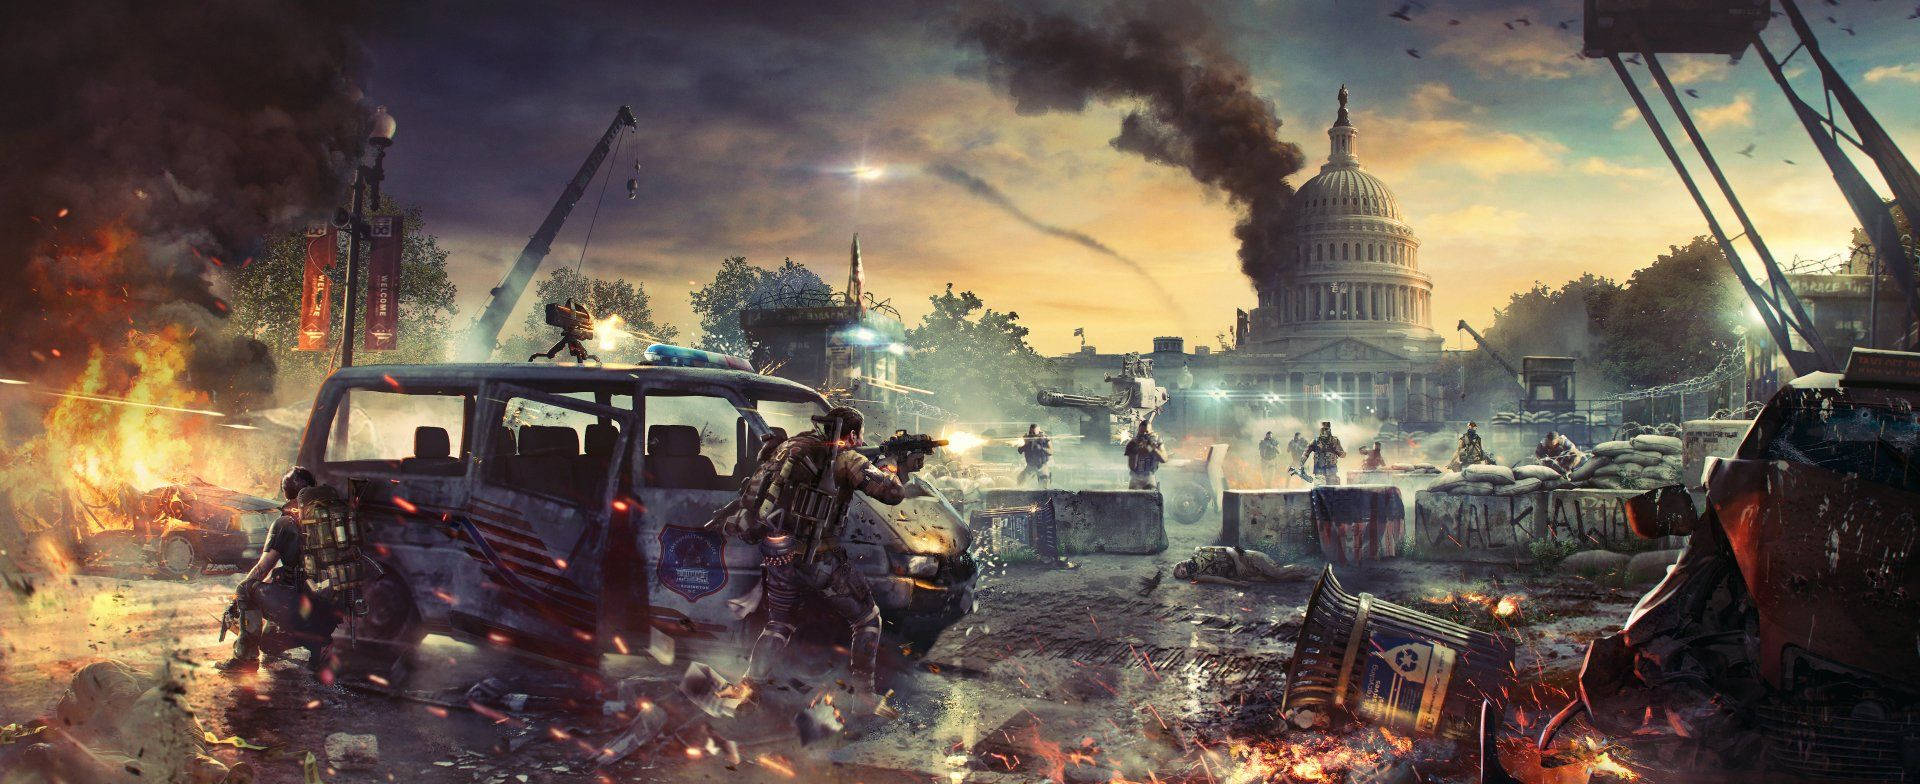 The Division 2 Gunfight In City